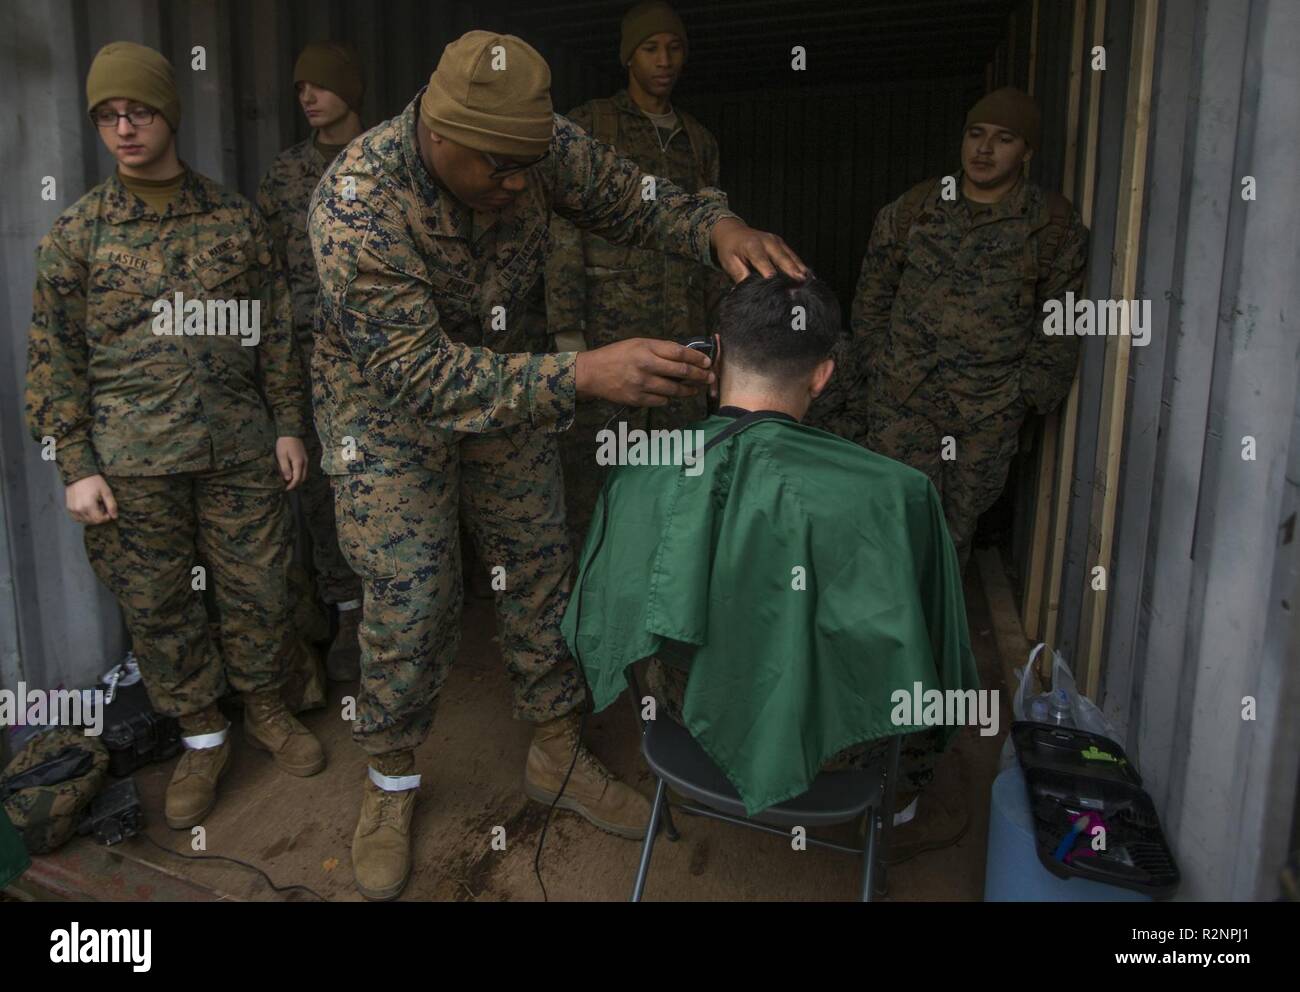 U.S. Marine Corps Sgt. Shaine Phillips with 2nd Intelligence Battalion, II Marine Expeditionary Force Information Group cuts Marines’ hair during Exercise Trident Juncture 18 at Vaernes Air Station, Norway, Nov. 4, 2018. Trident Juncture 18 enhances the U.S. and NATO Allies’ and partners’ abilities to work together collectively to conduct military operations under challenging conditions. Stock Photo